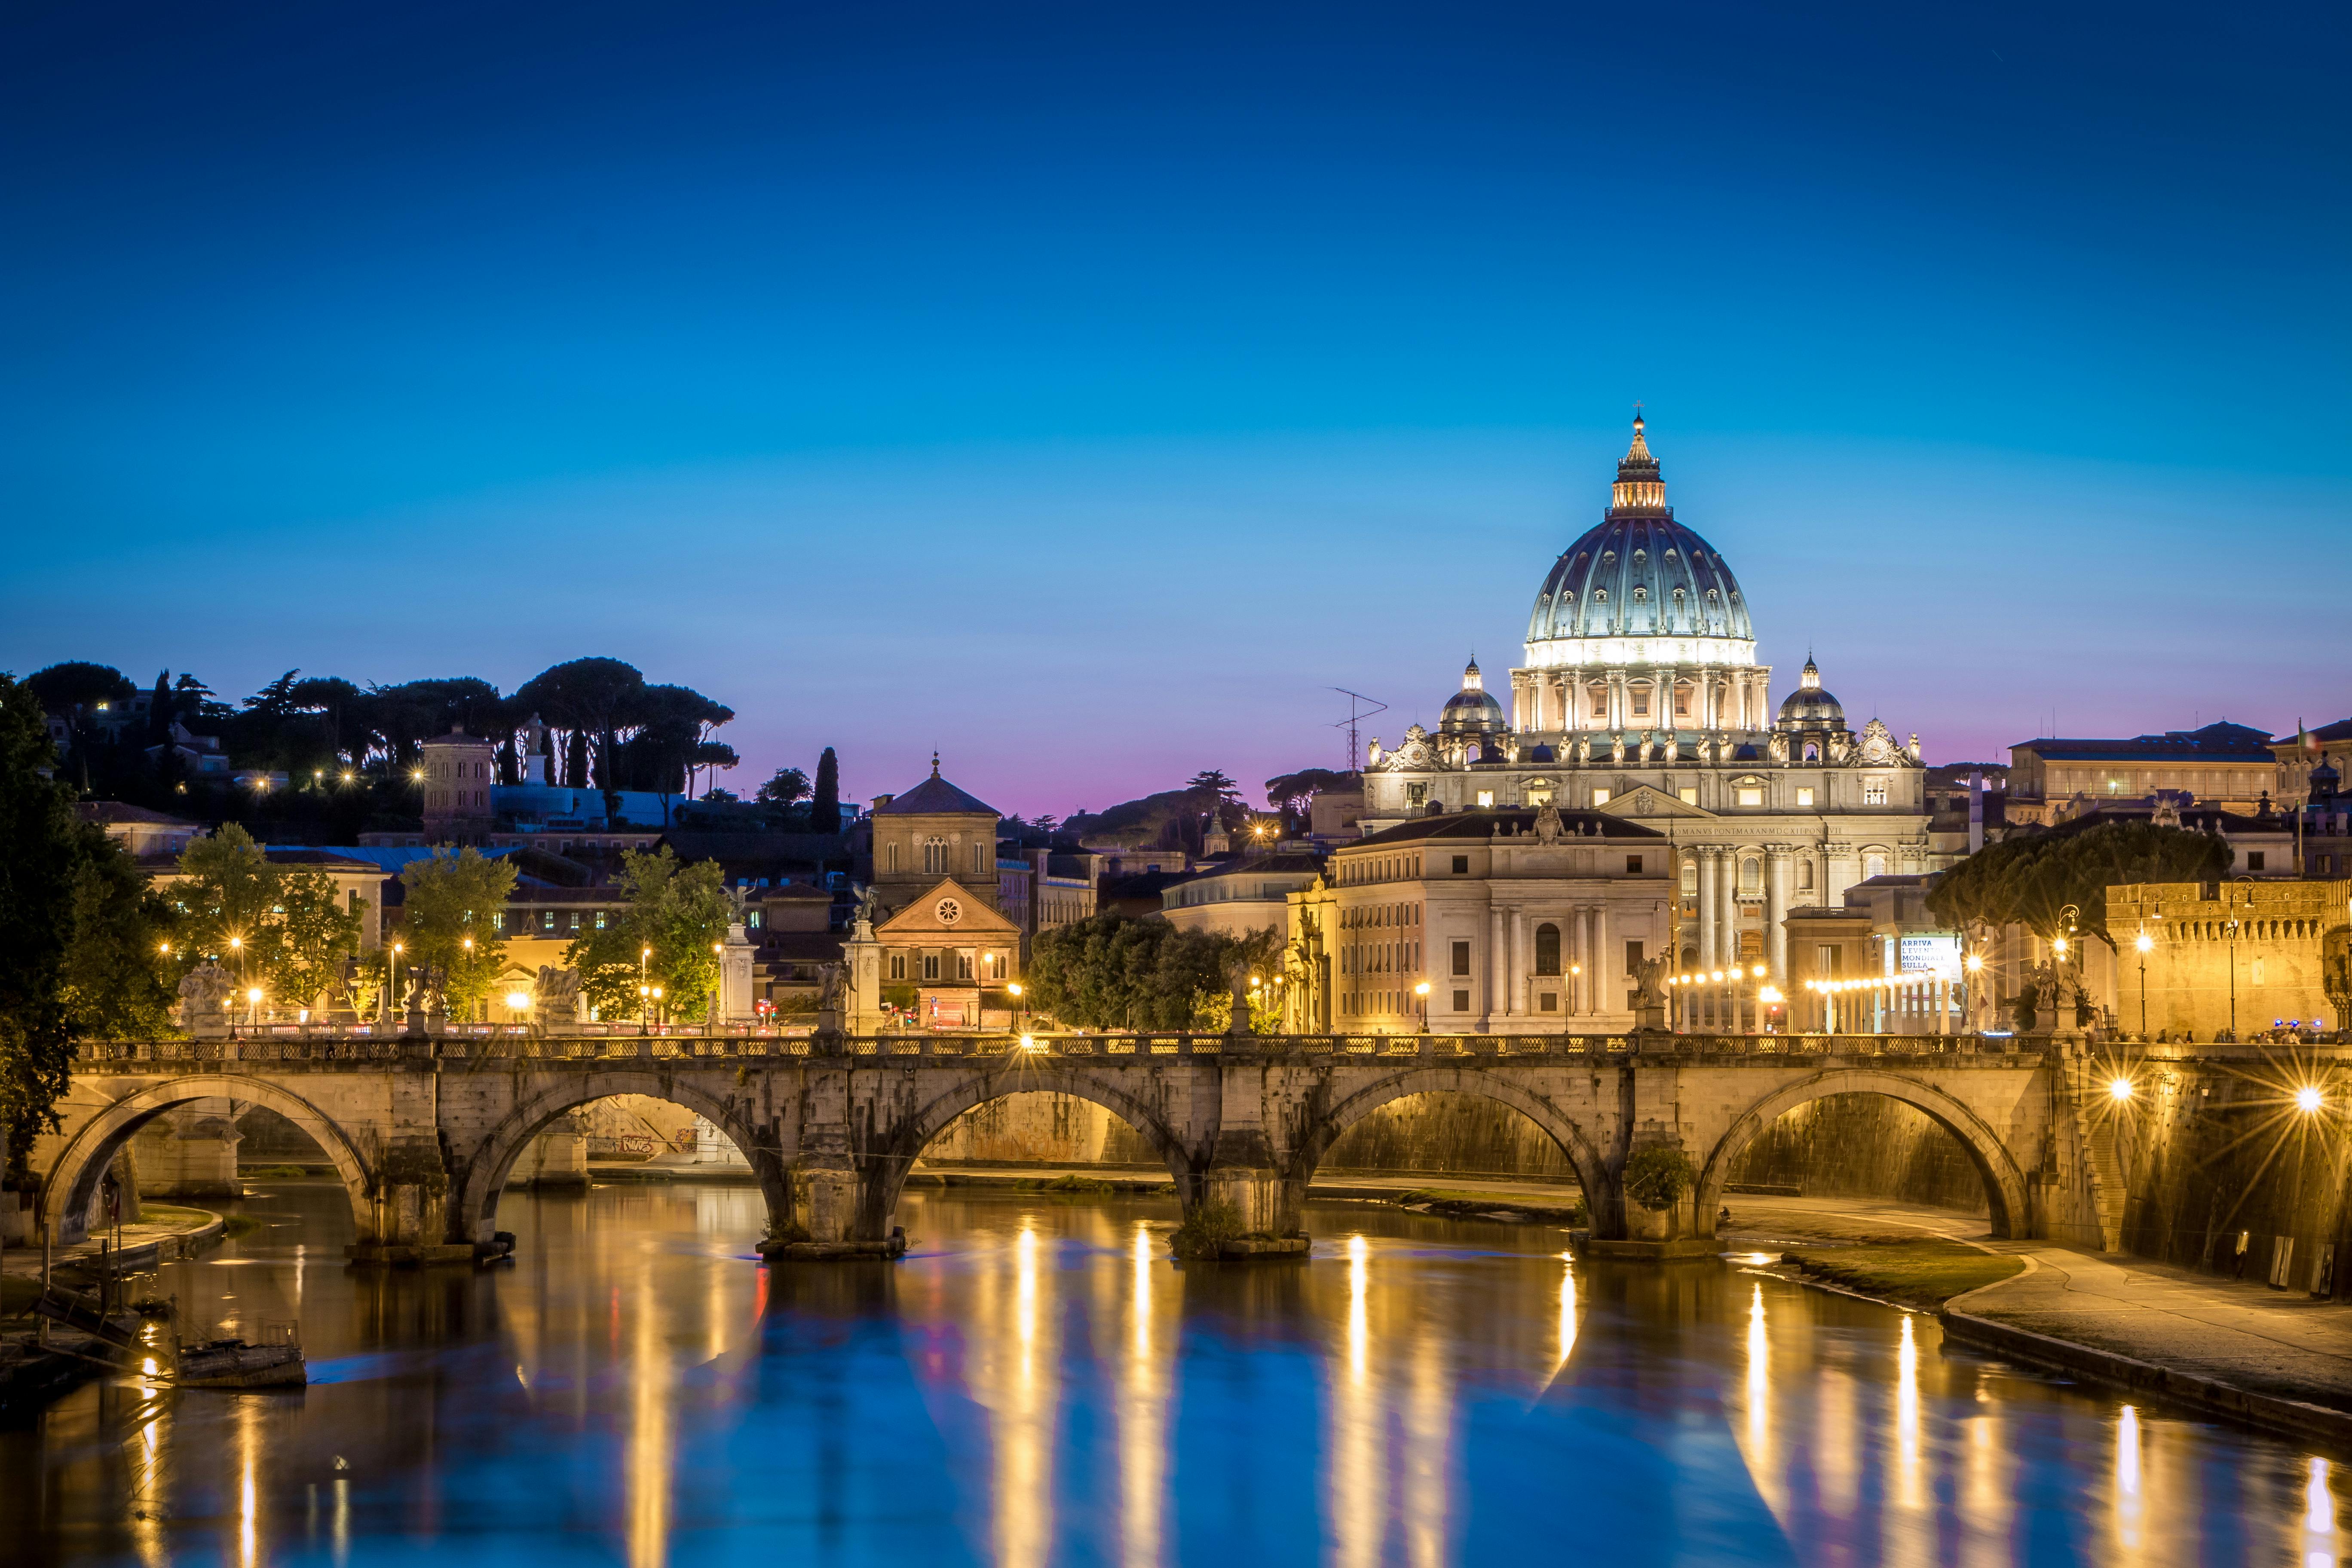 E-bike night tour of Rome with tasting of local food